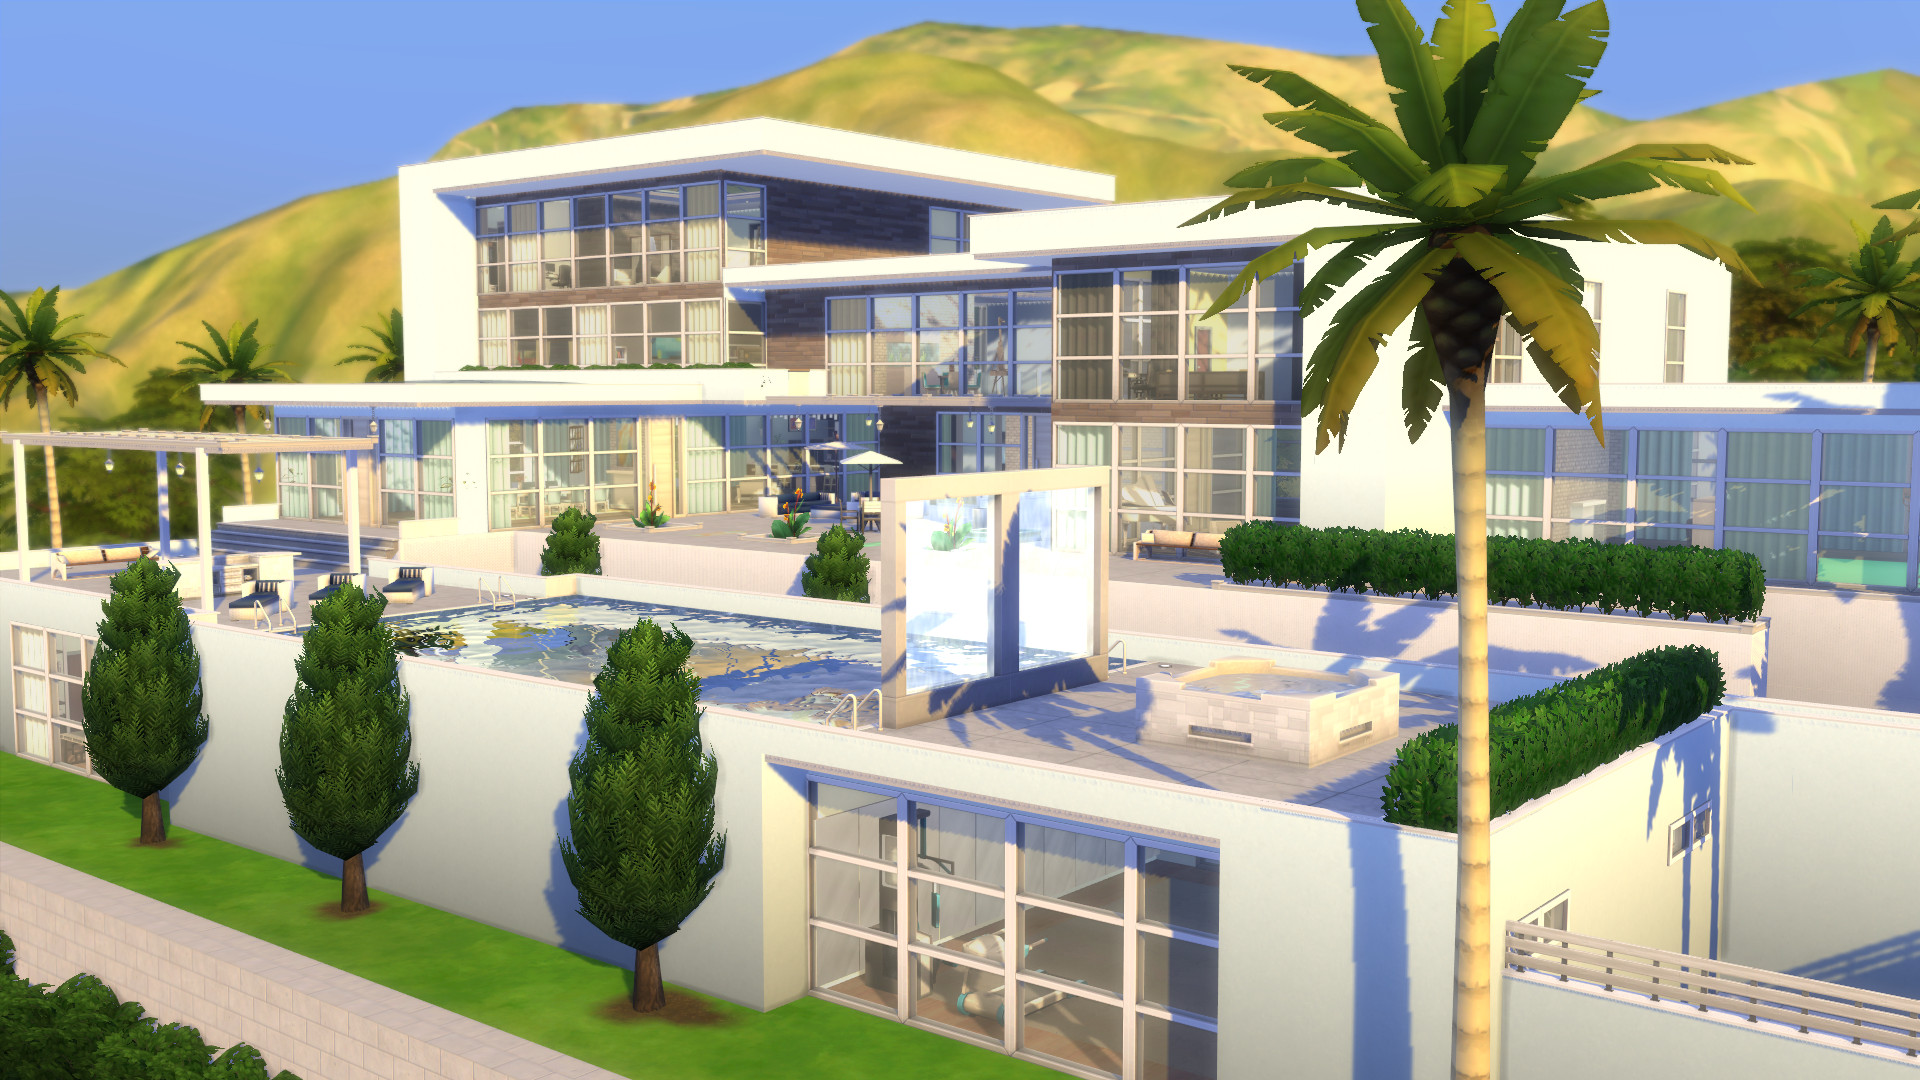 sims 4 house download